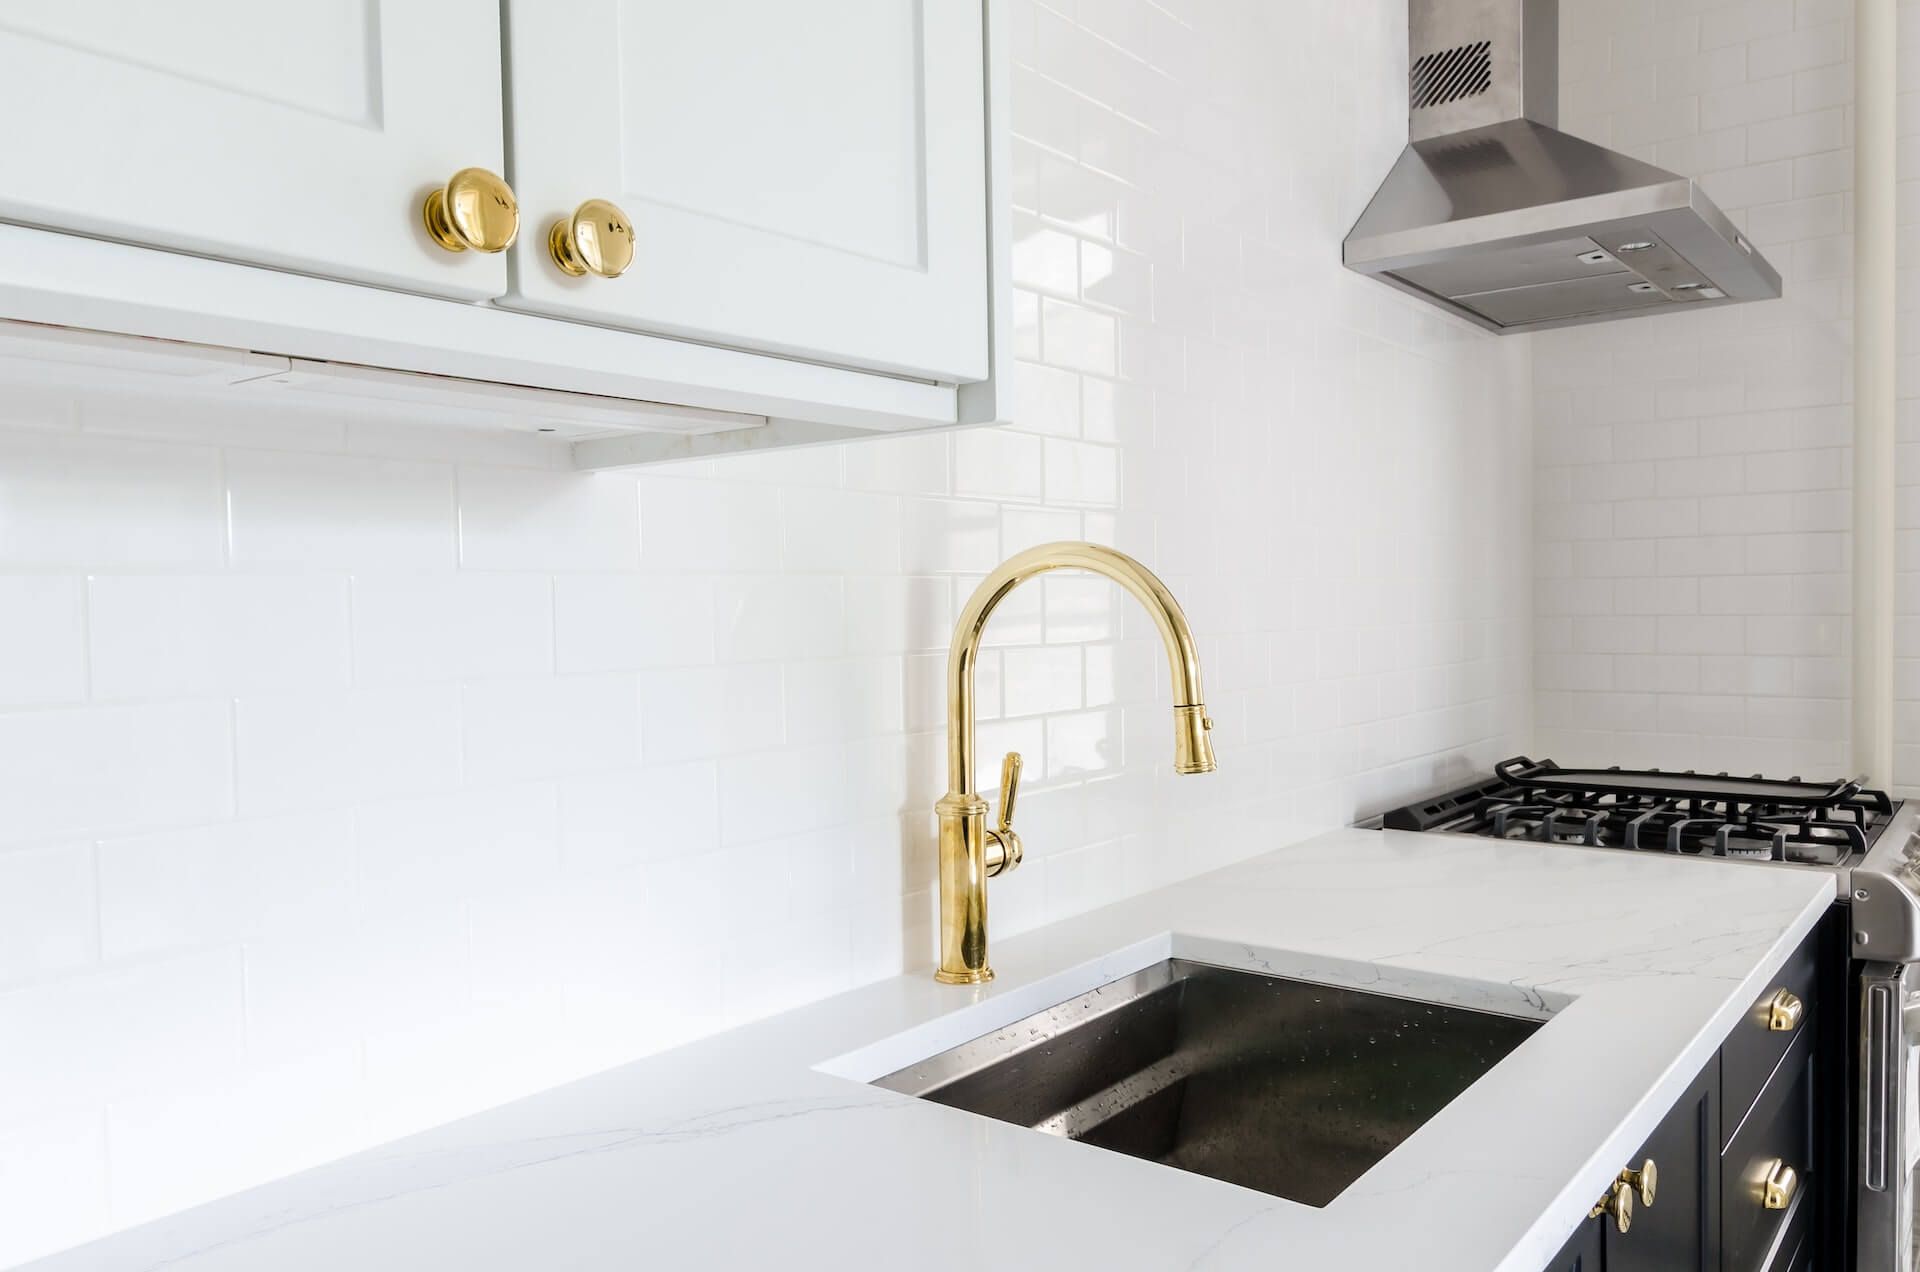 Gold kitchen cabinet hardware and gold faucet